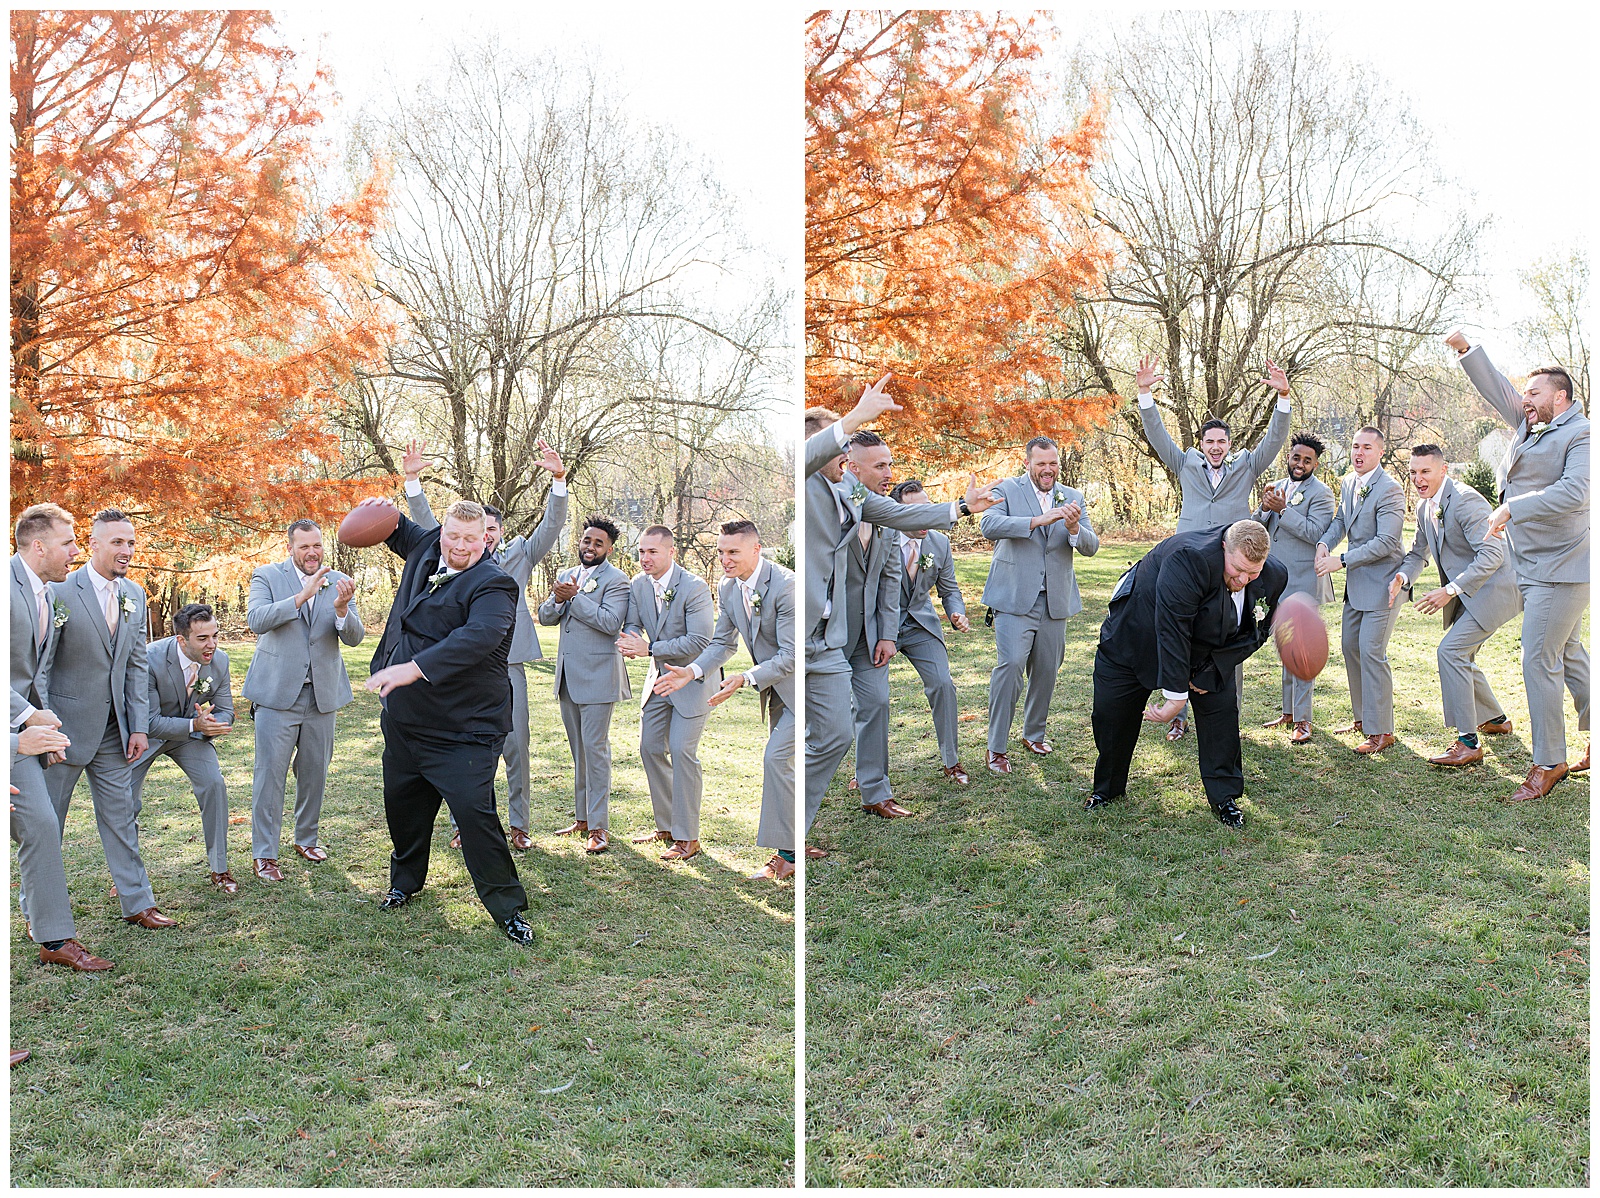 groom "slamming" a football to the ground with groomsmen behind